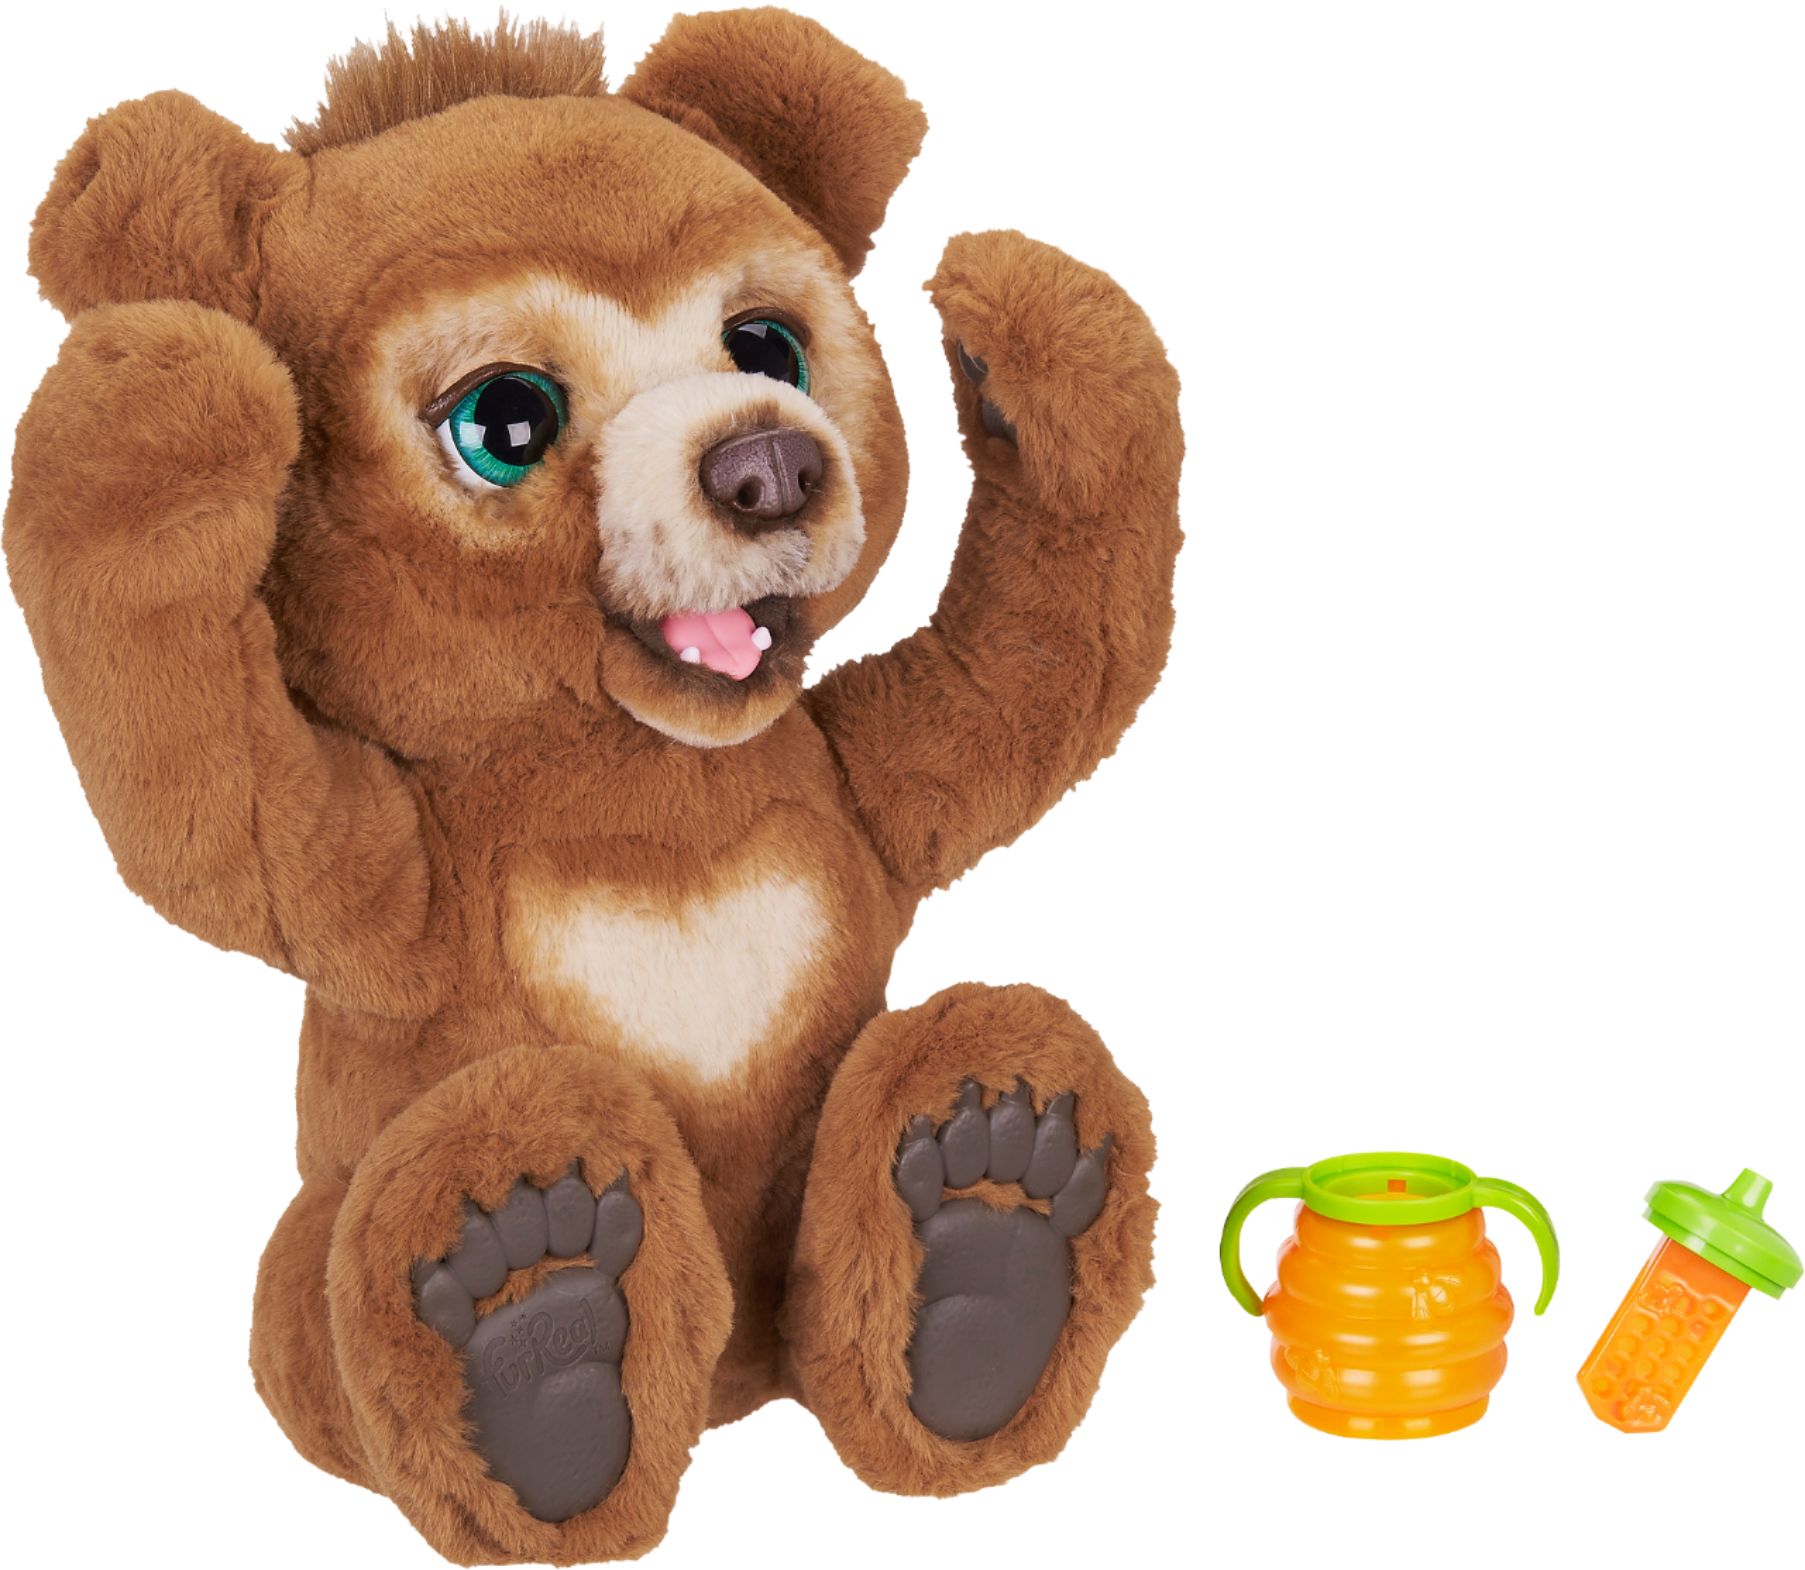 FurReal - Cubby, The Curious Bear Interactive Plush Toy